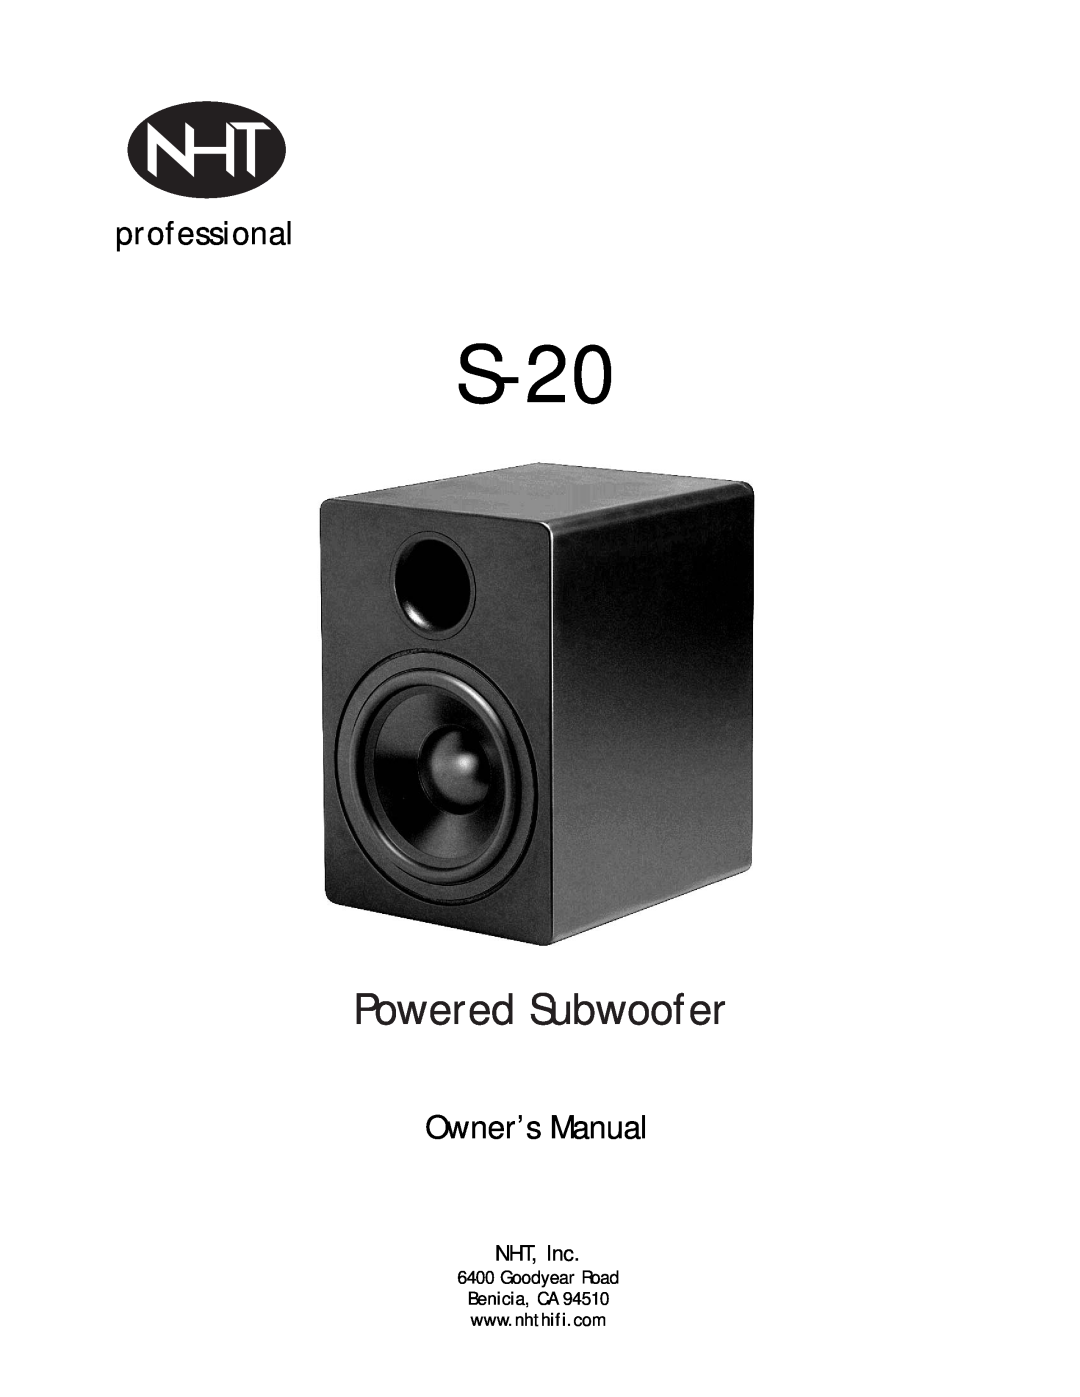 NHT S-20 owner manual Powered Subwoofer, professional, NHT, Inc 